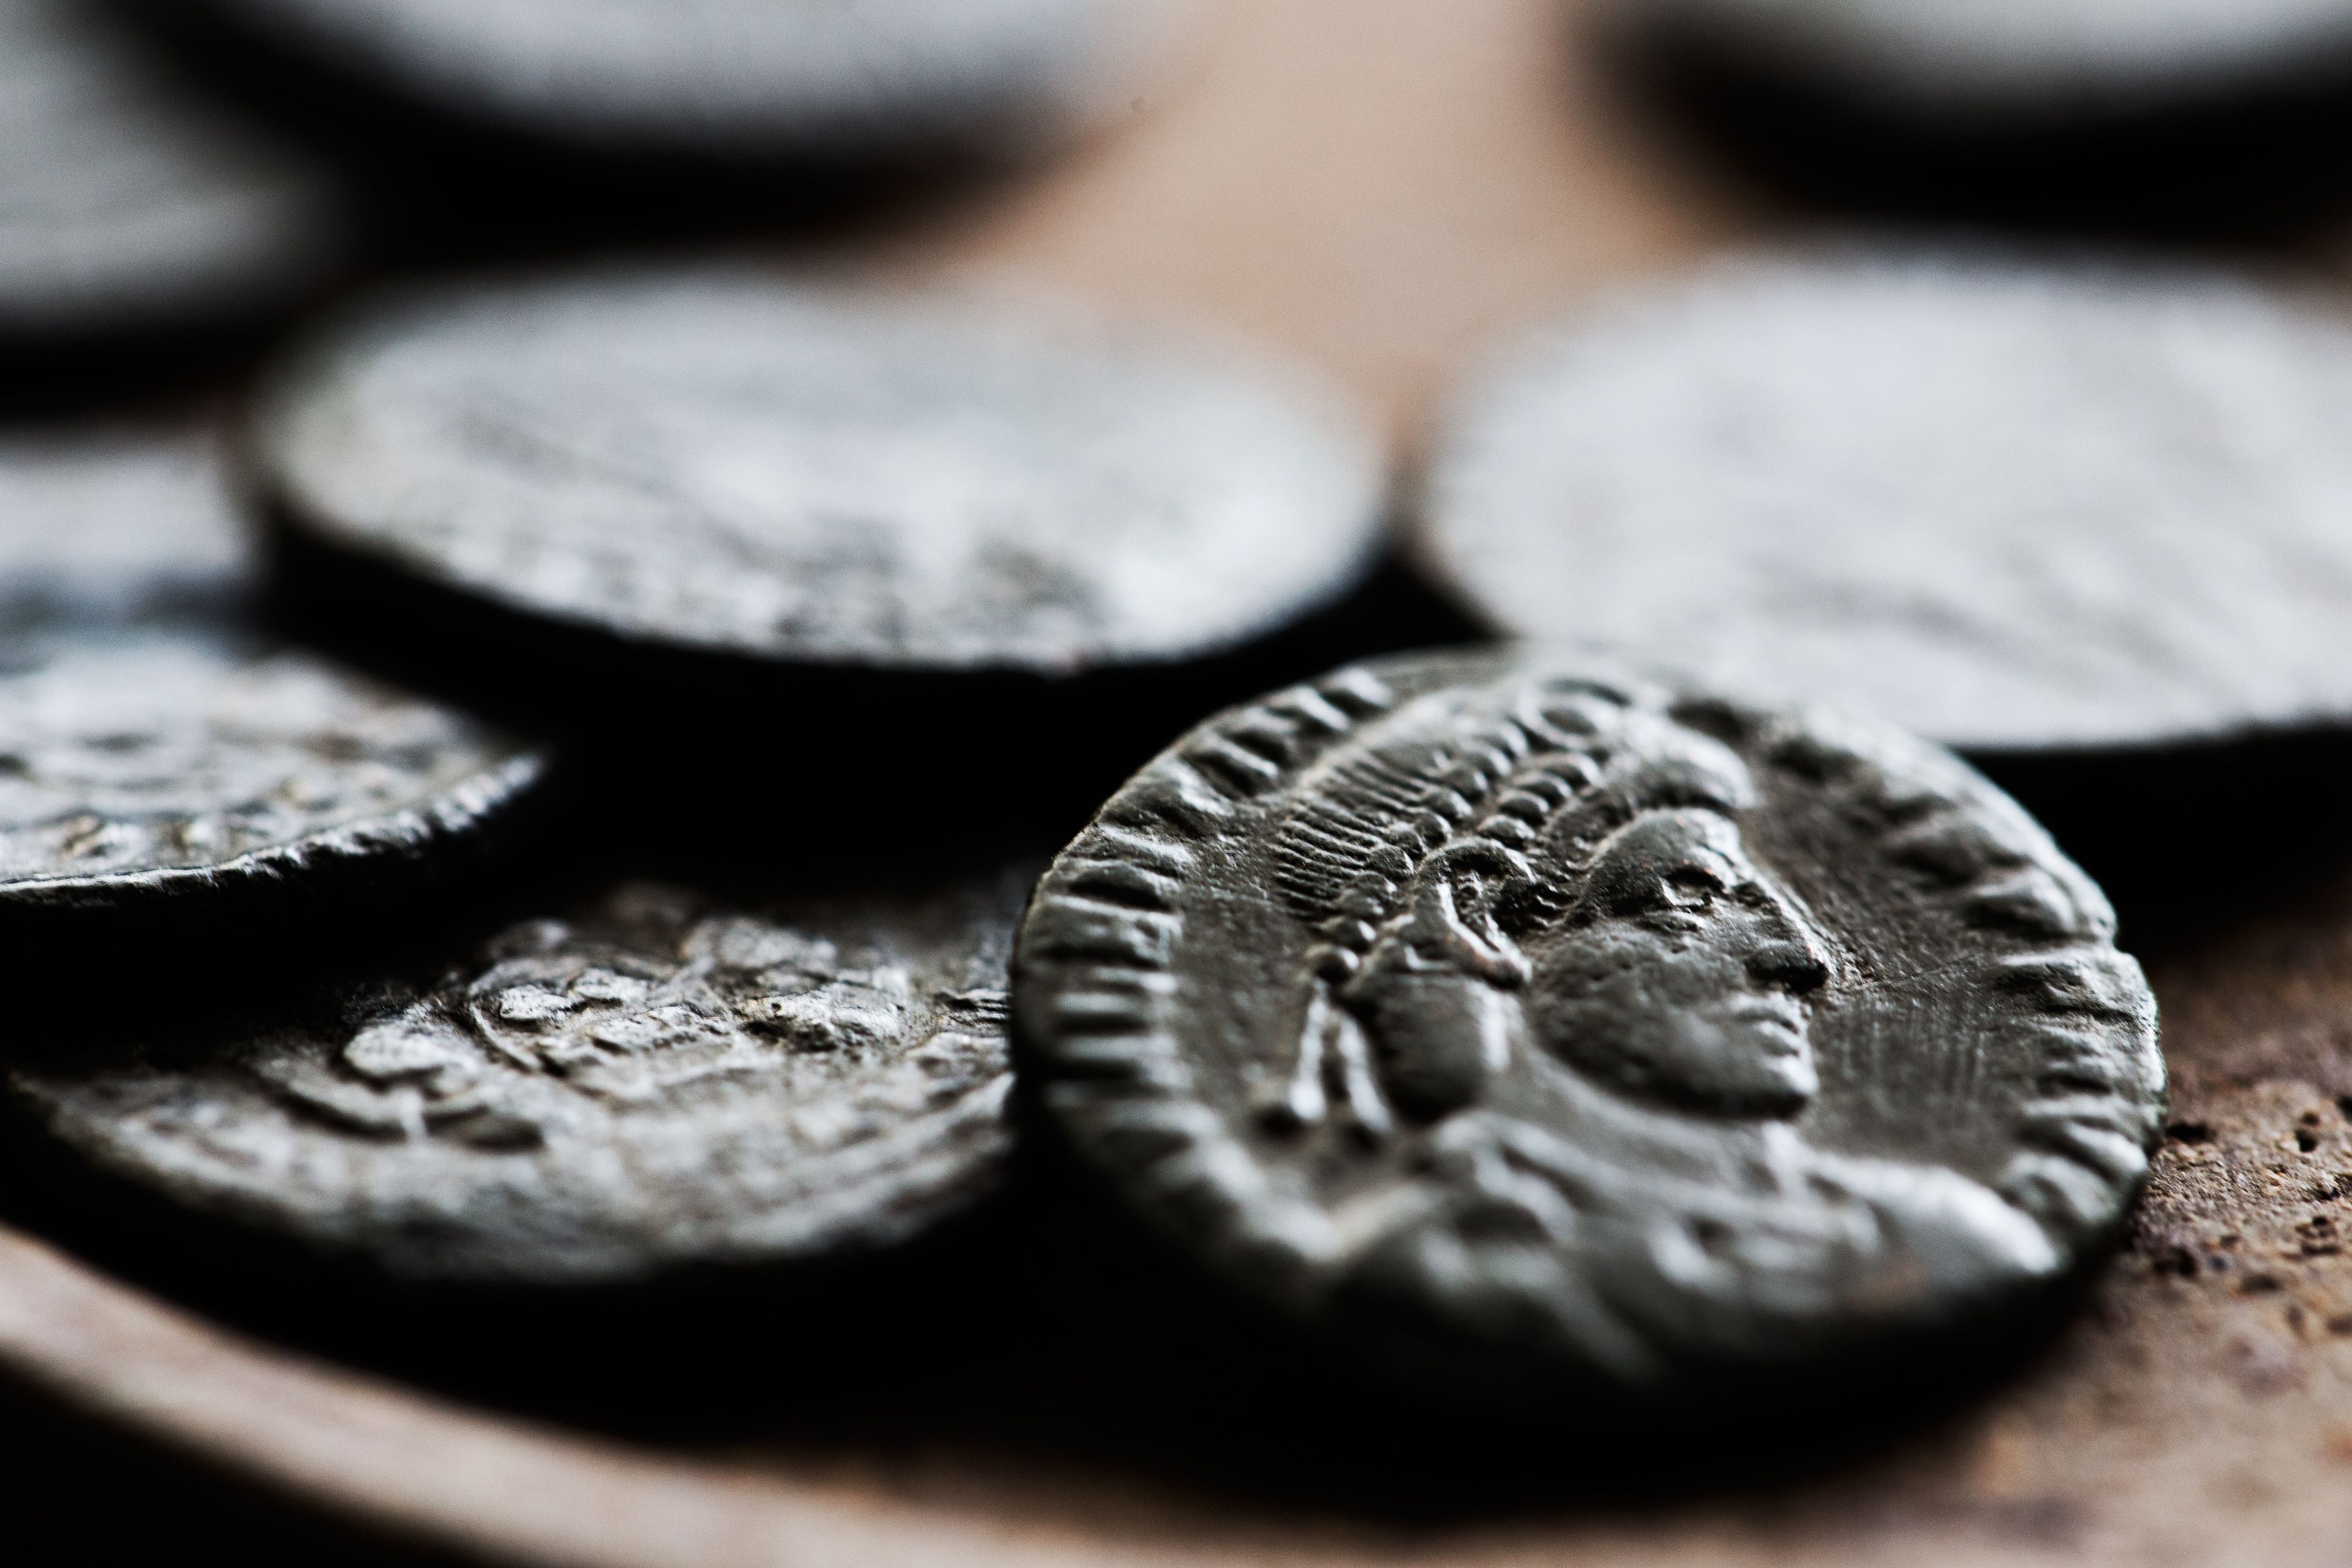 A close-up of some ancient coins.